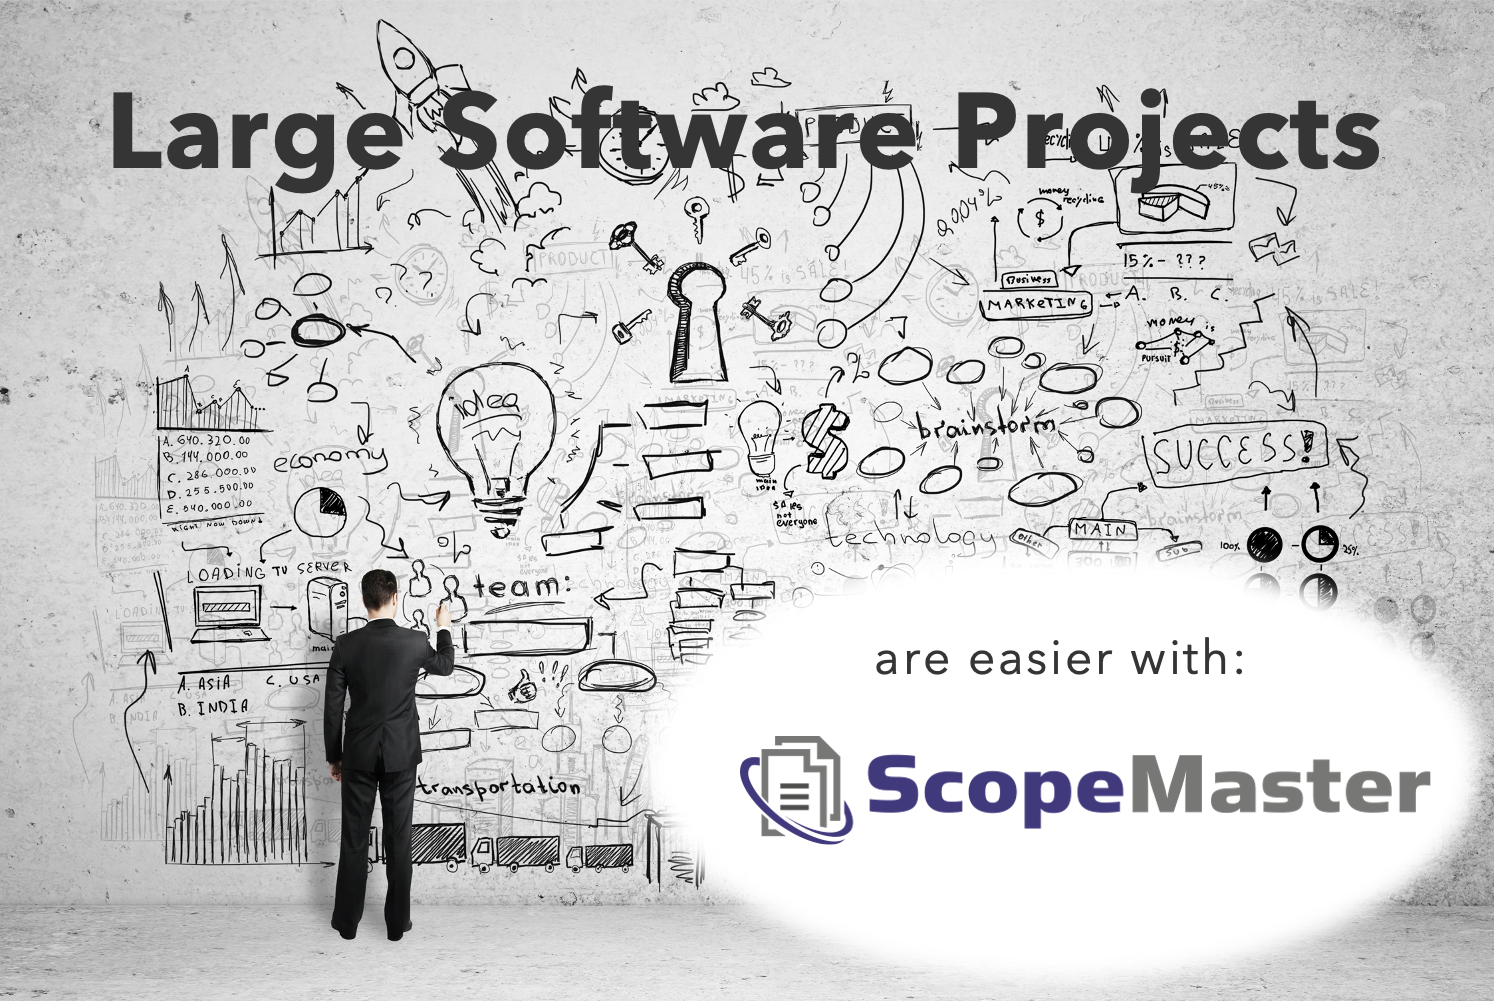 Large Software Projects are hard, yet made easier with ScopeMaster